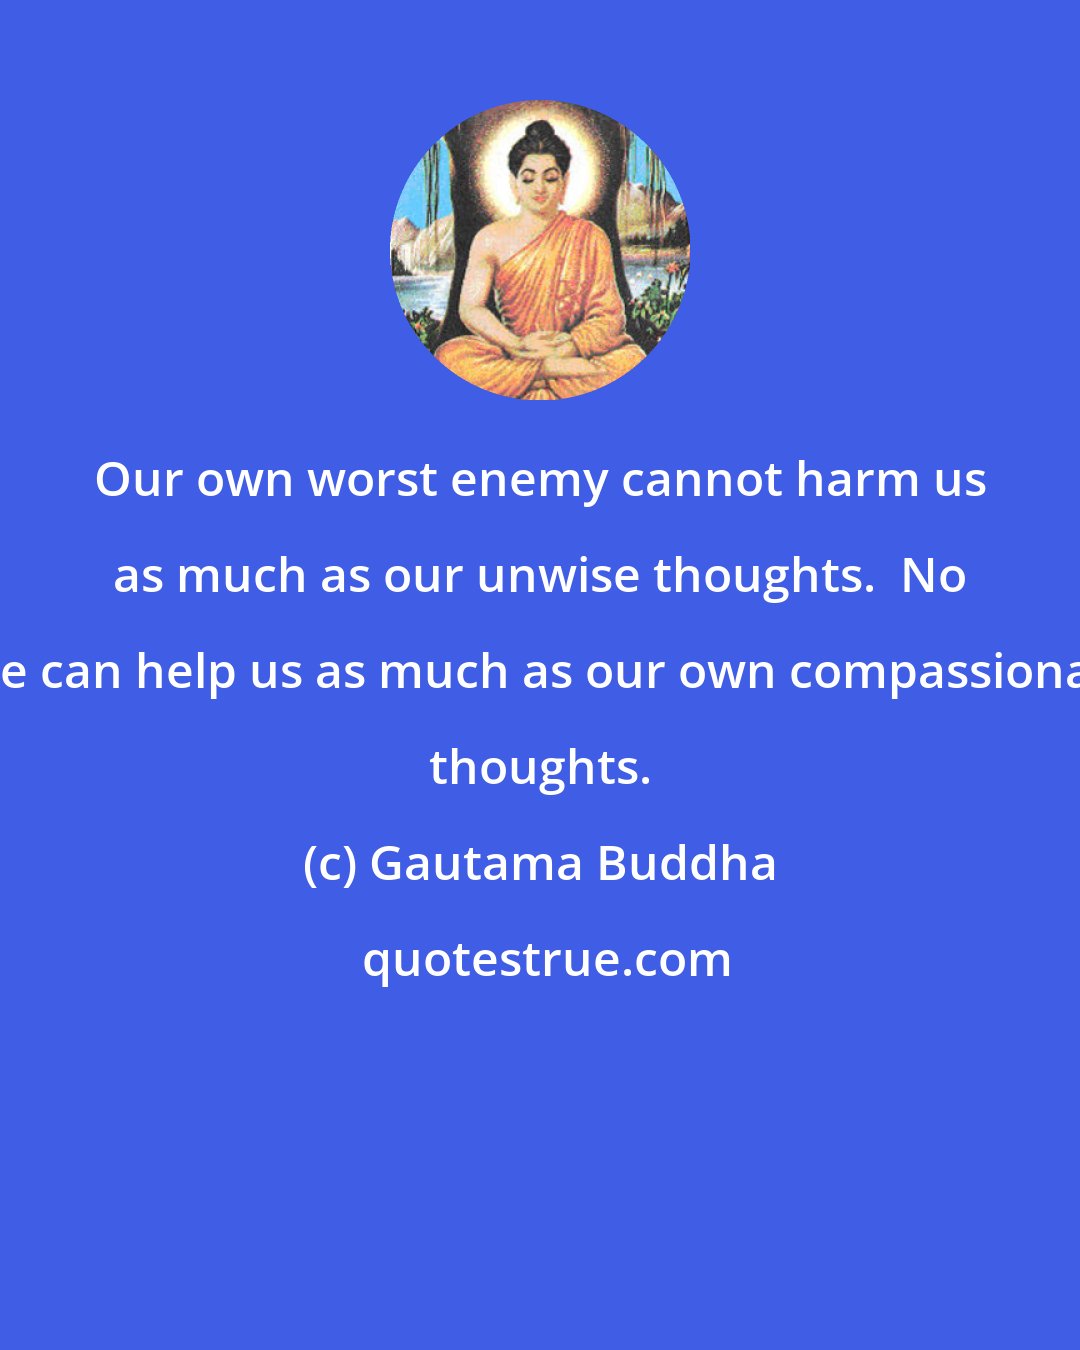 Gautama Buddha: Our own worst enemy cannot harm us as much as our unwise thoughts.  No one can help us as much as our own compassionate thoughts.